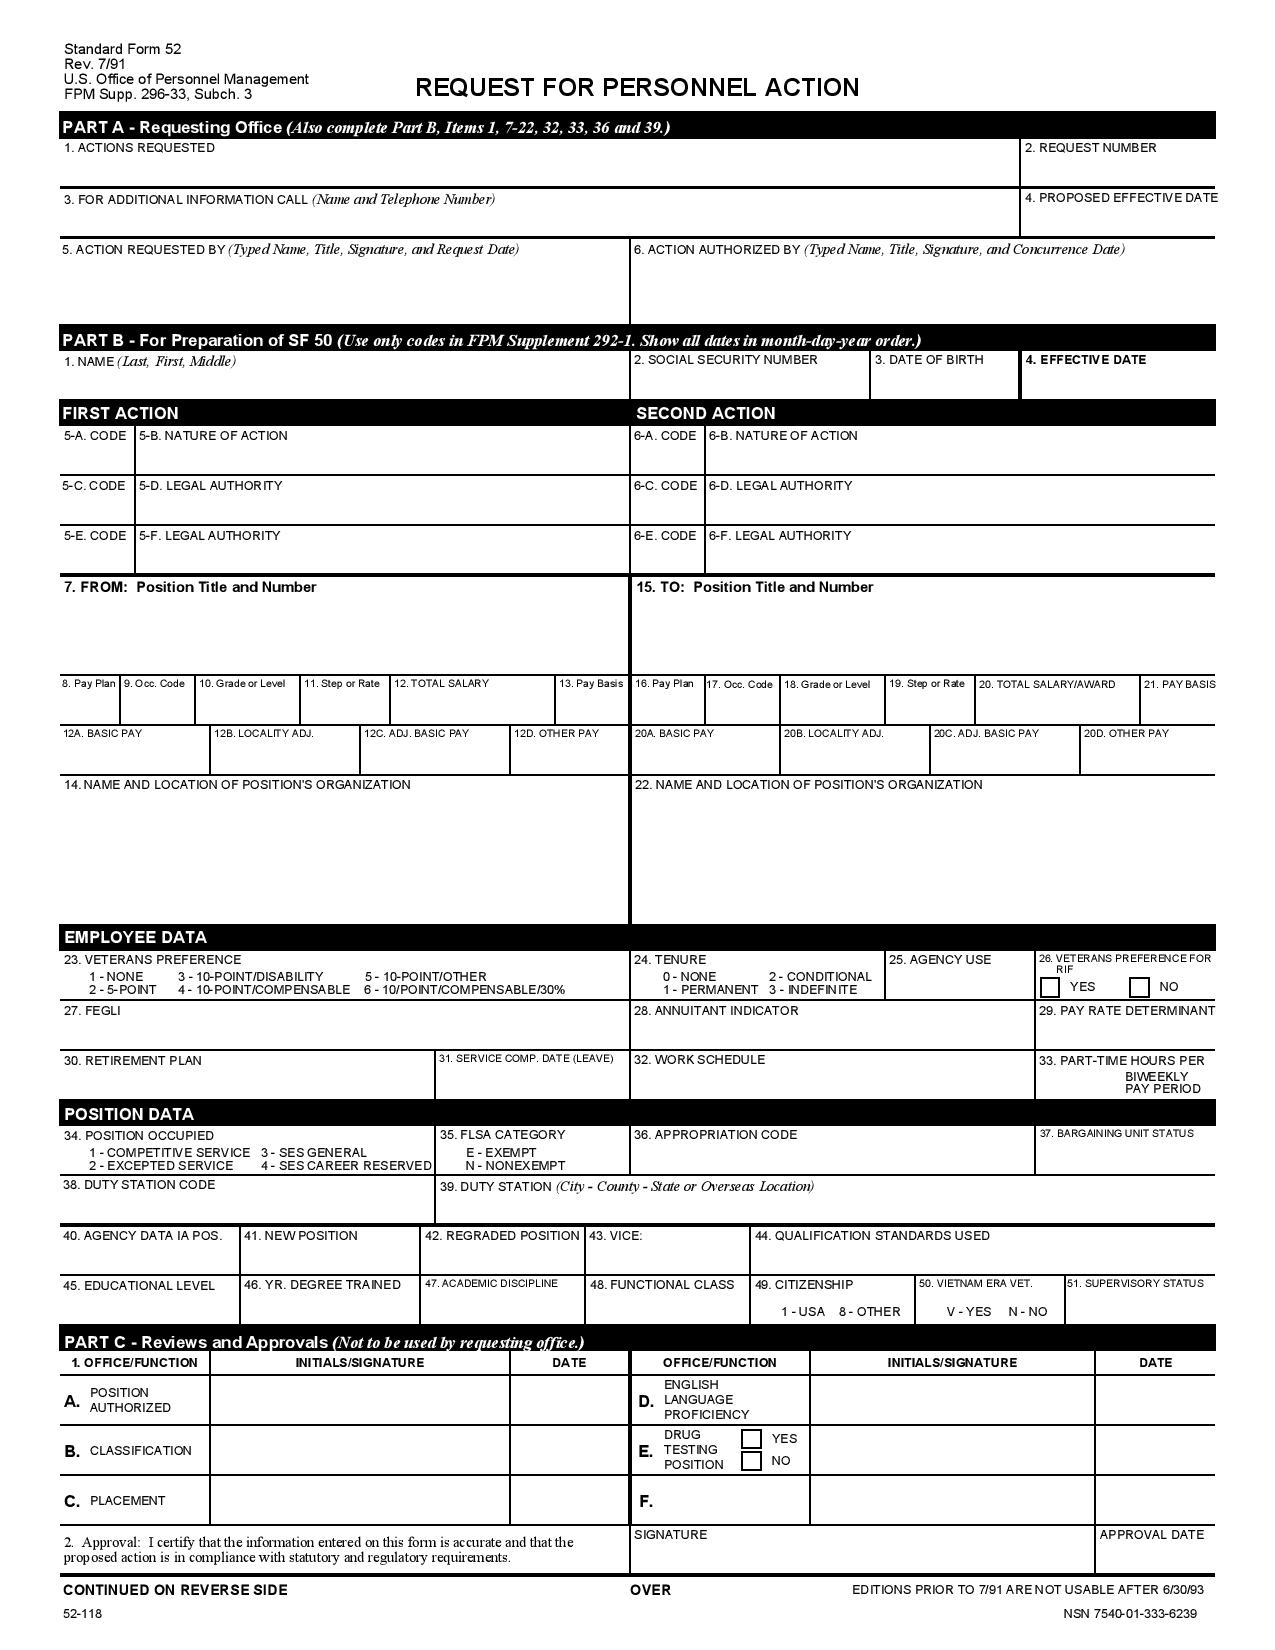 request for employee personnel action form page 001